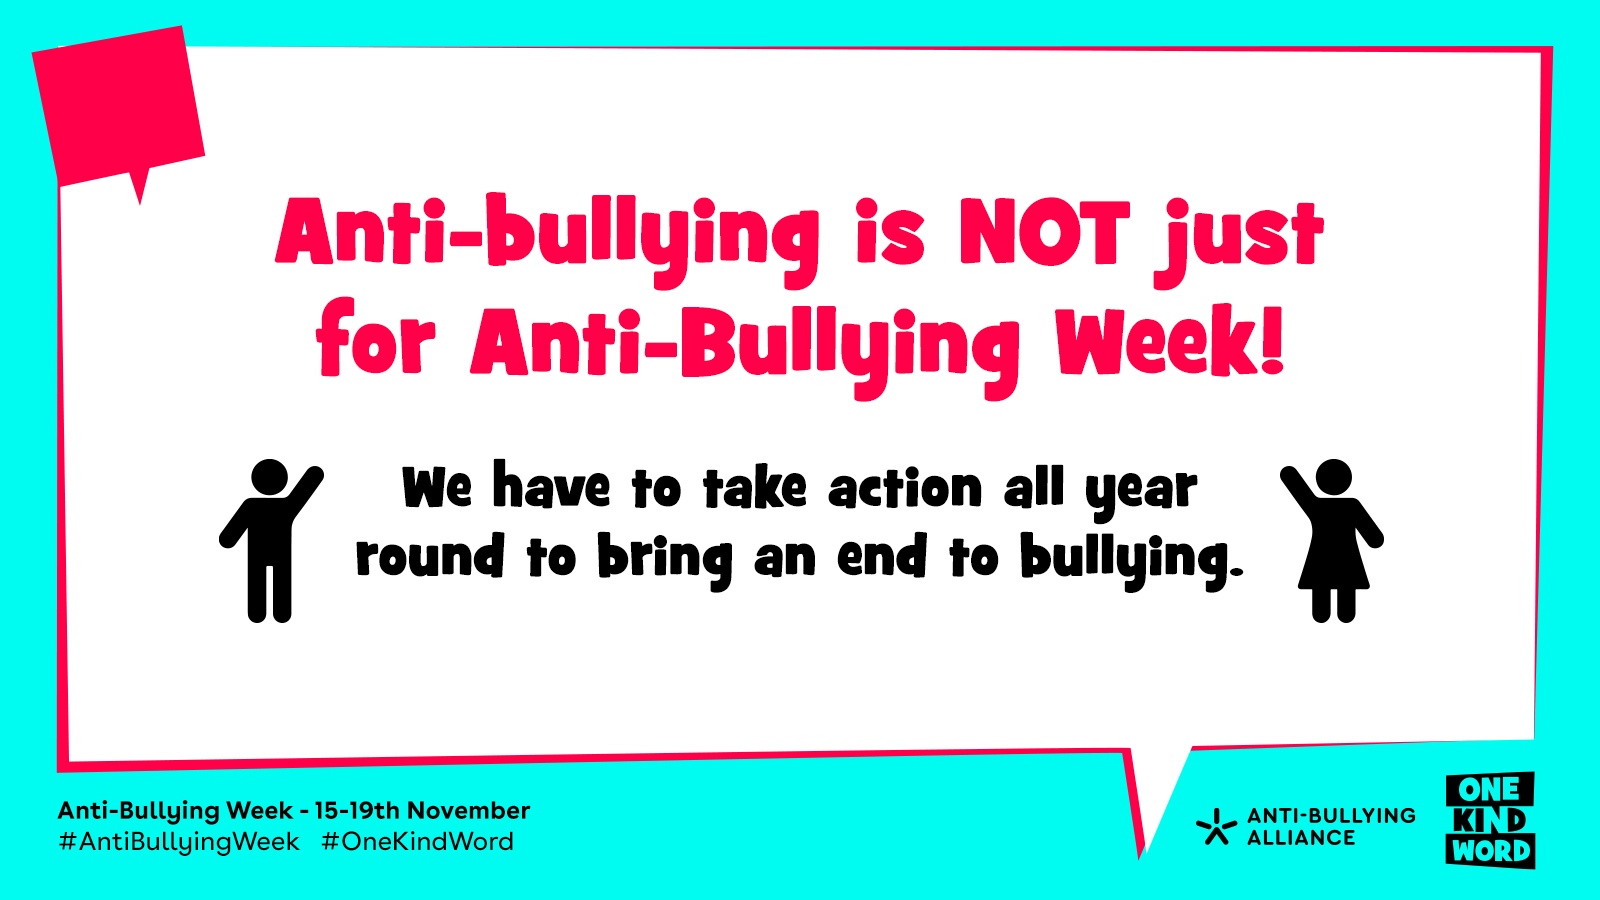 Anti-bullying is not just for Anti-Bullying Week. We have to take action all year round to bring an end to bullying.